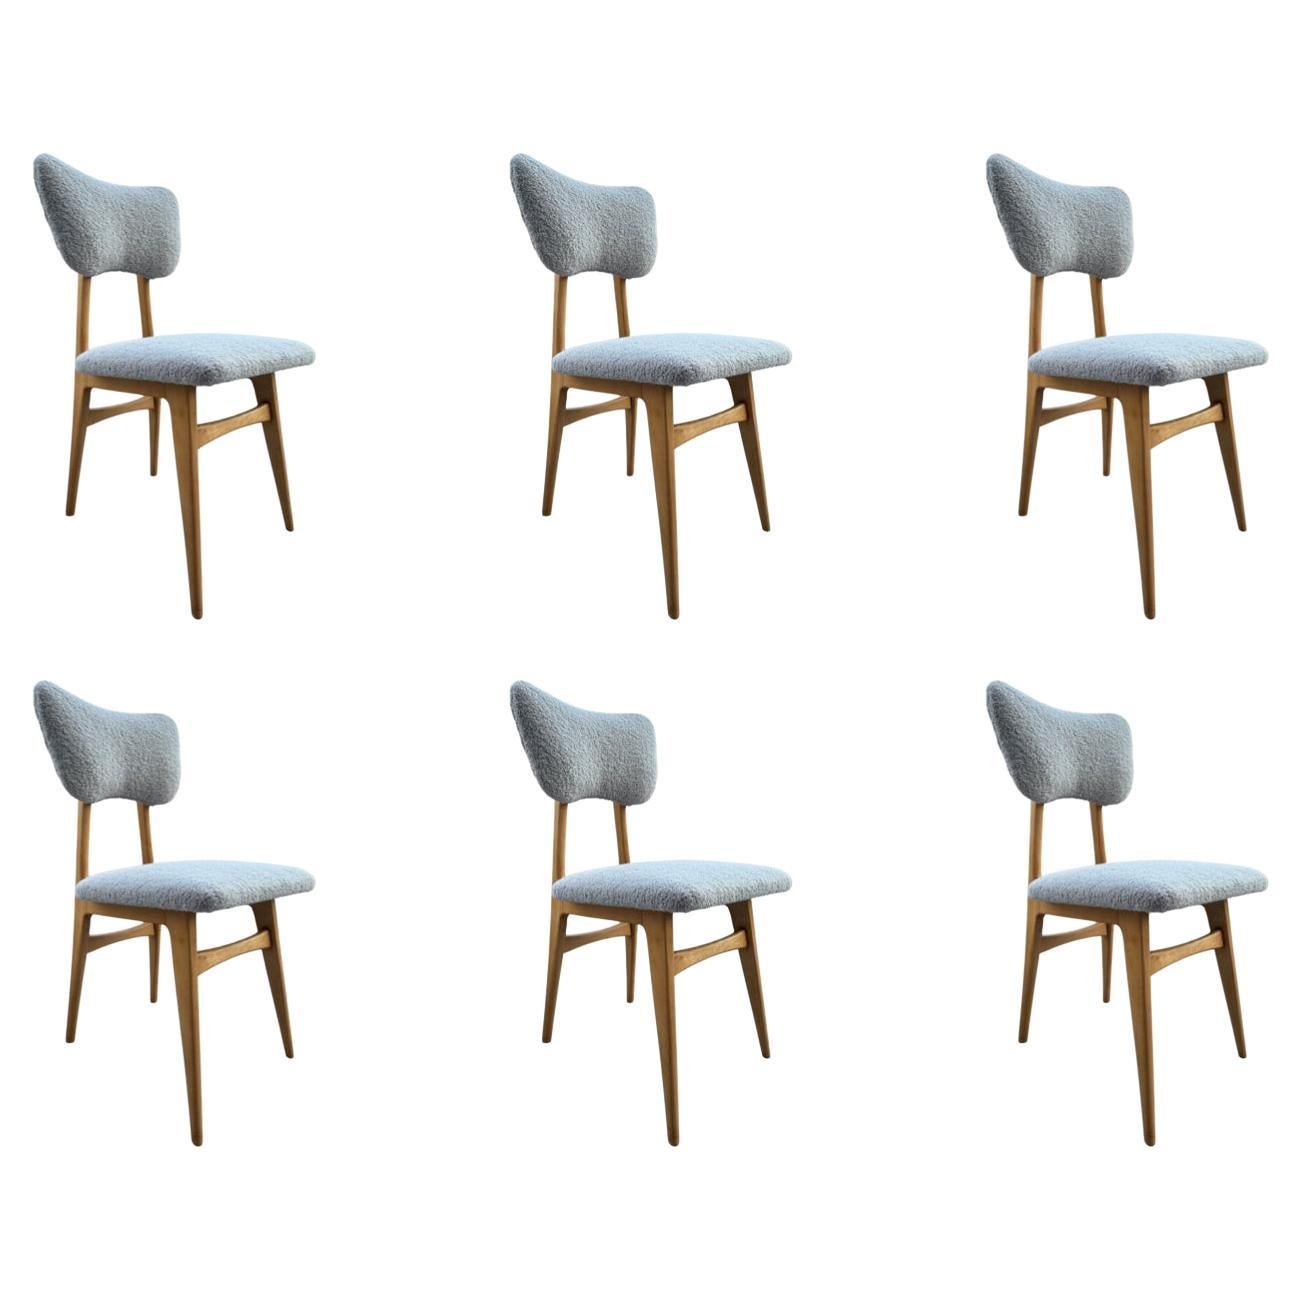 Set of 6 Midcentury Grey Bouclé Dining Chairs, 1960s For Sale